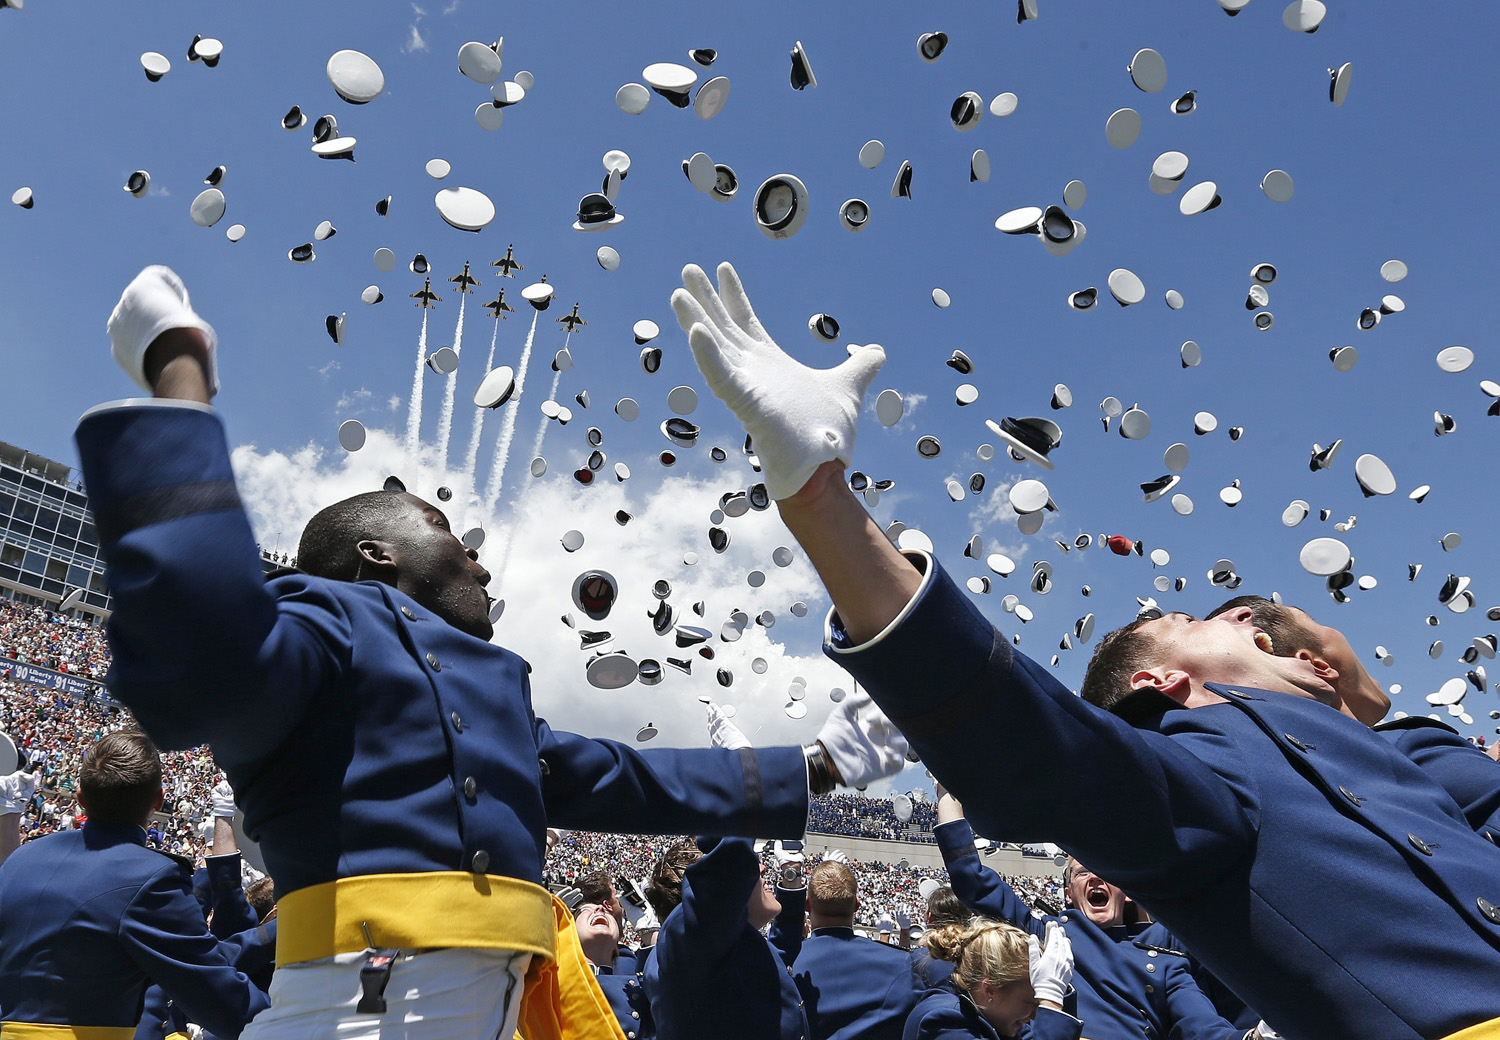 Air Force Academy graduates throw their caps into the air as F-16 jets from the Air Force group, The Thunderbirds, make a flyover at the completion of the graduation ceremony for the class of 2014 at the U.S. Air Force Academy in Colorado on May 28, 2014.